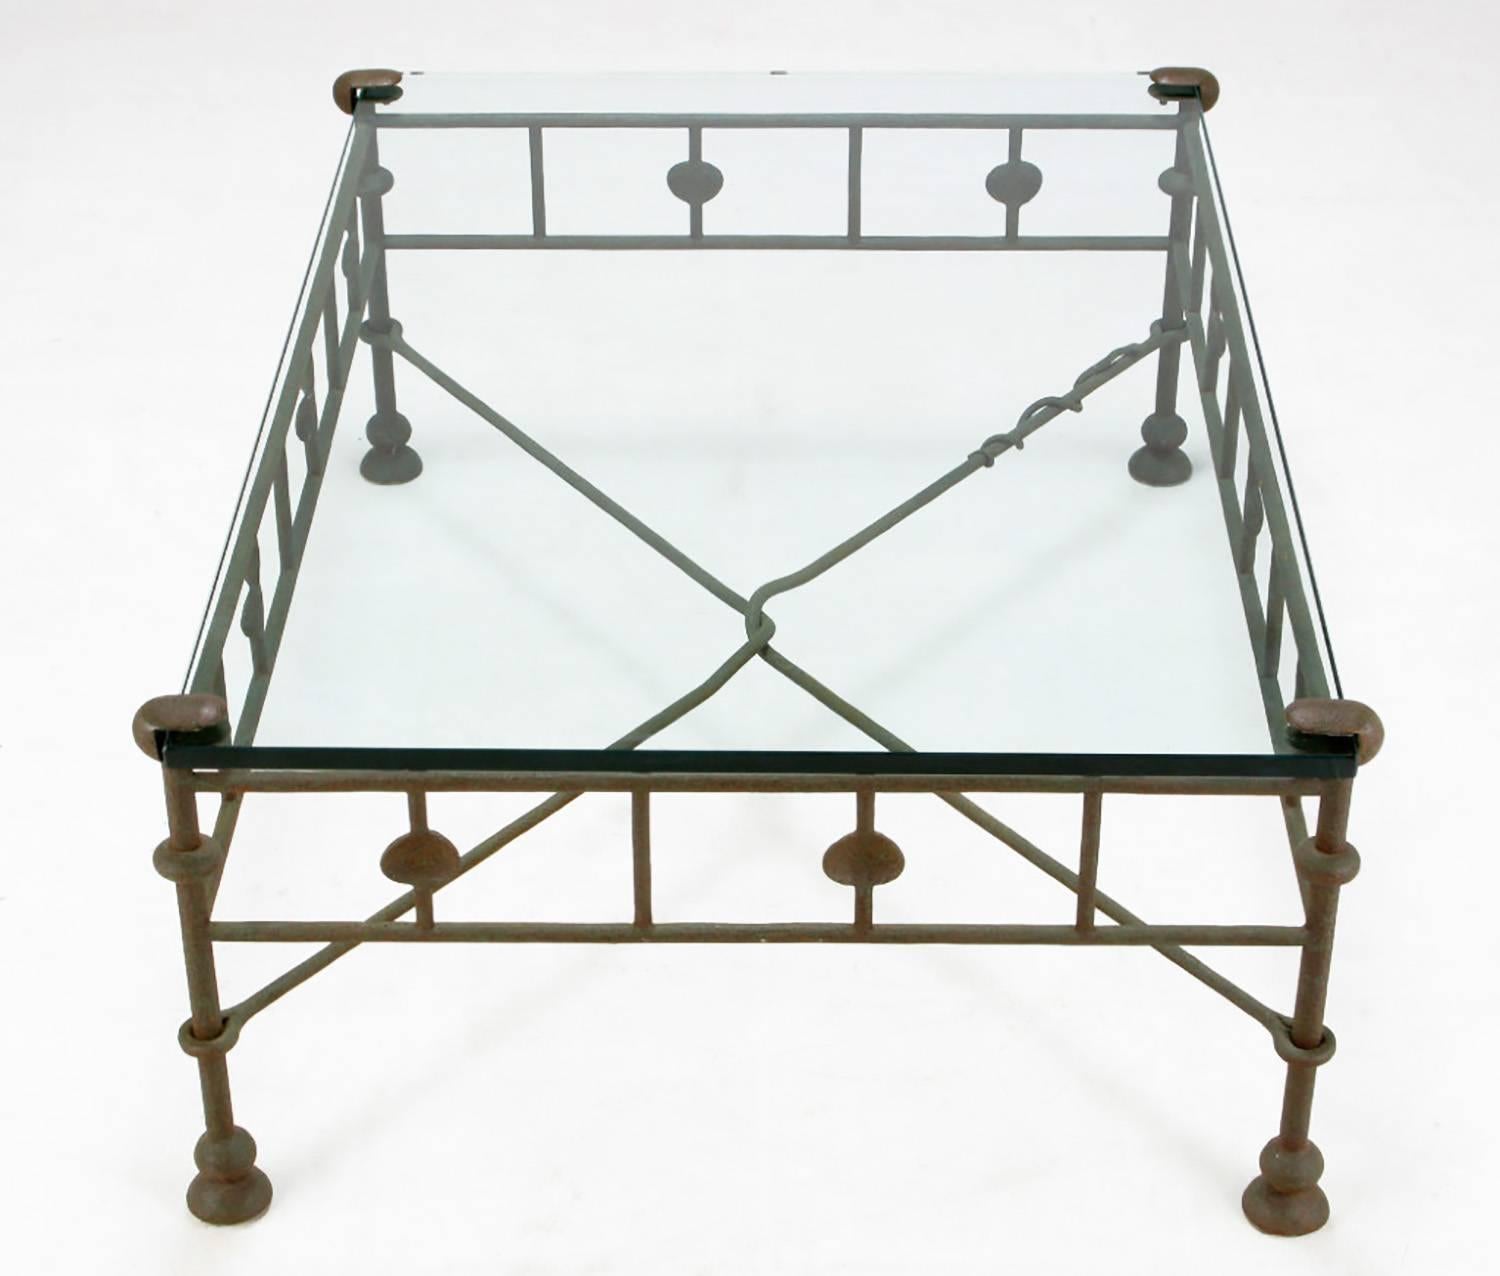 An exceptional wrought iron coffee table inspired by Diego Giacometti. The natural patina is perfect, not too oxidized and not too polished. The form and craftsmanship is very much like the work of Giacometti right down the snake wrapped around the